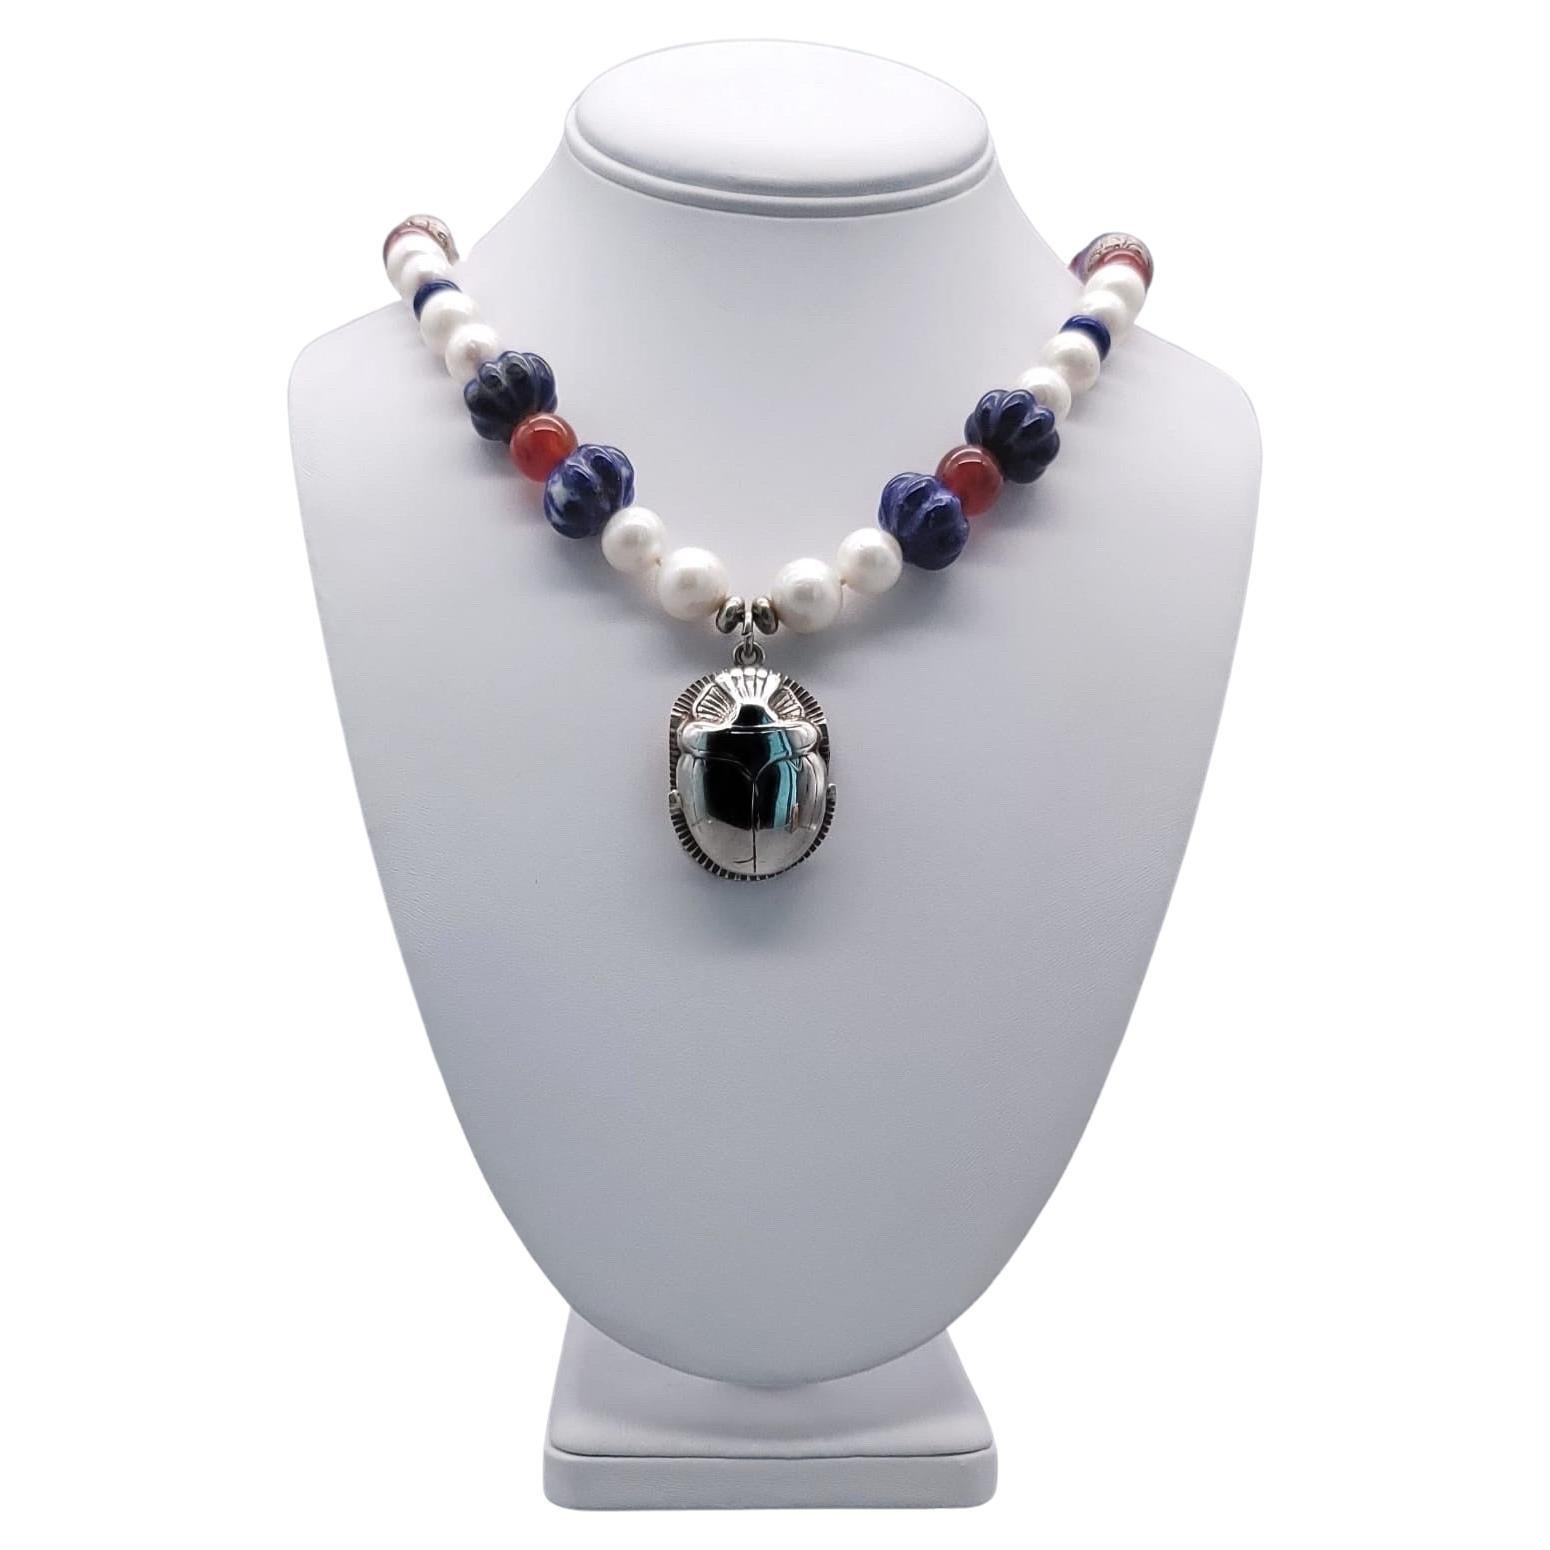 A.Jeschel  Freshwater Pearl and Lapis necklace with a silver scarab pendant. For Sale